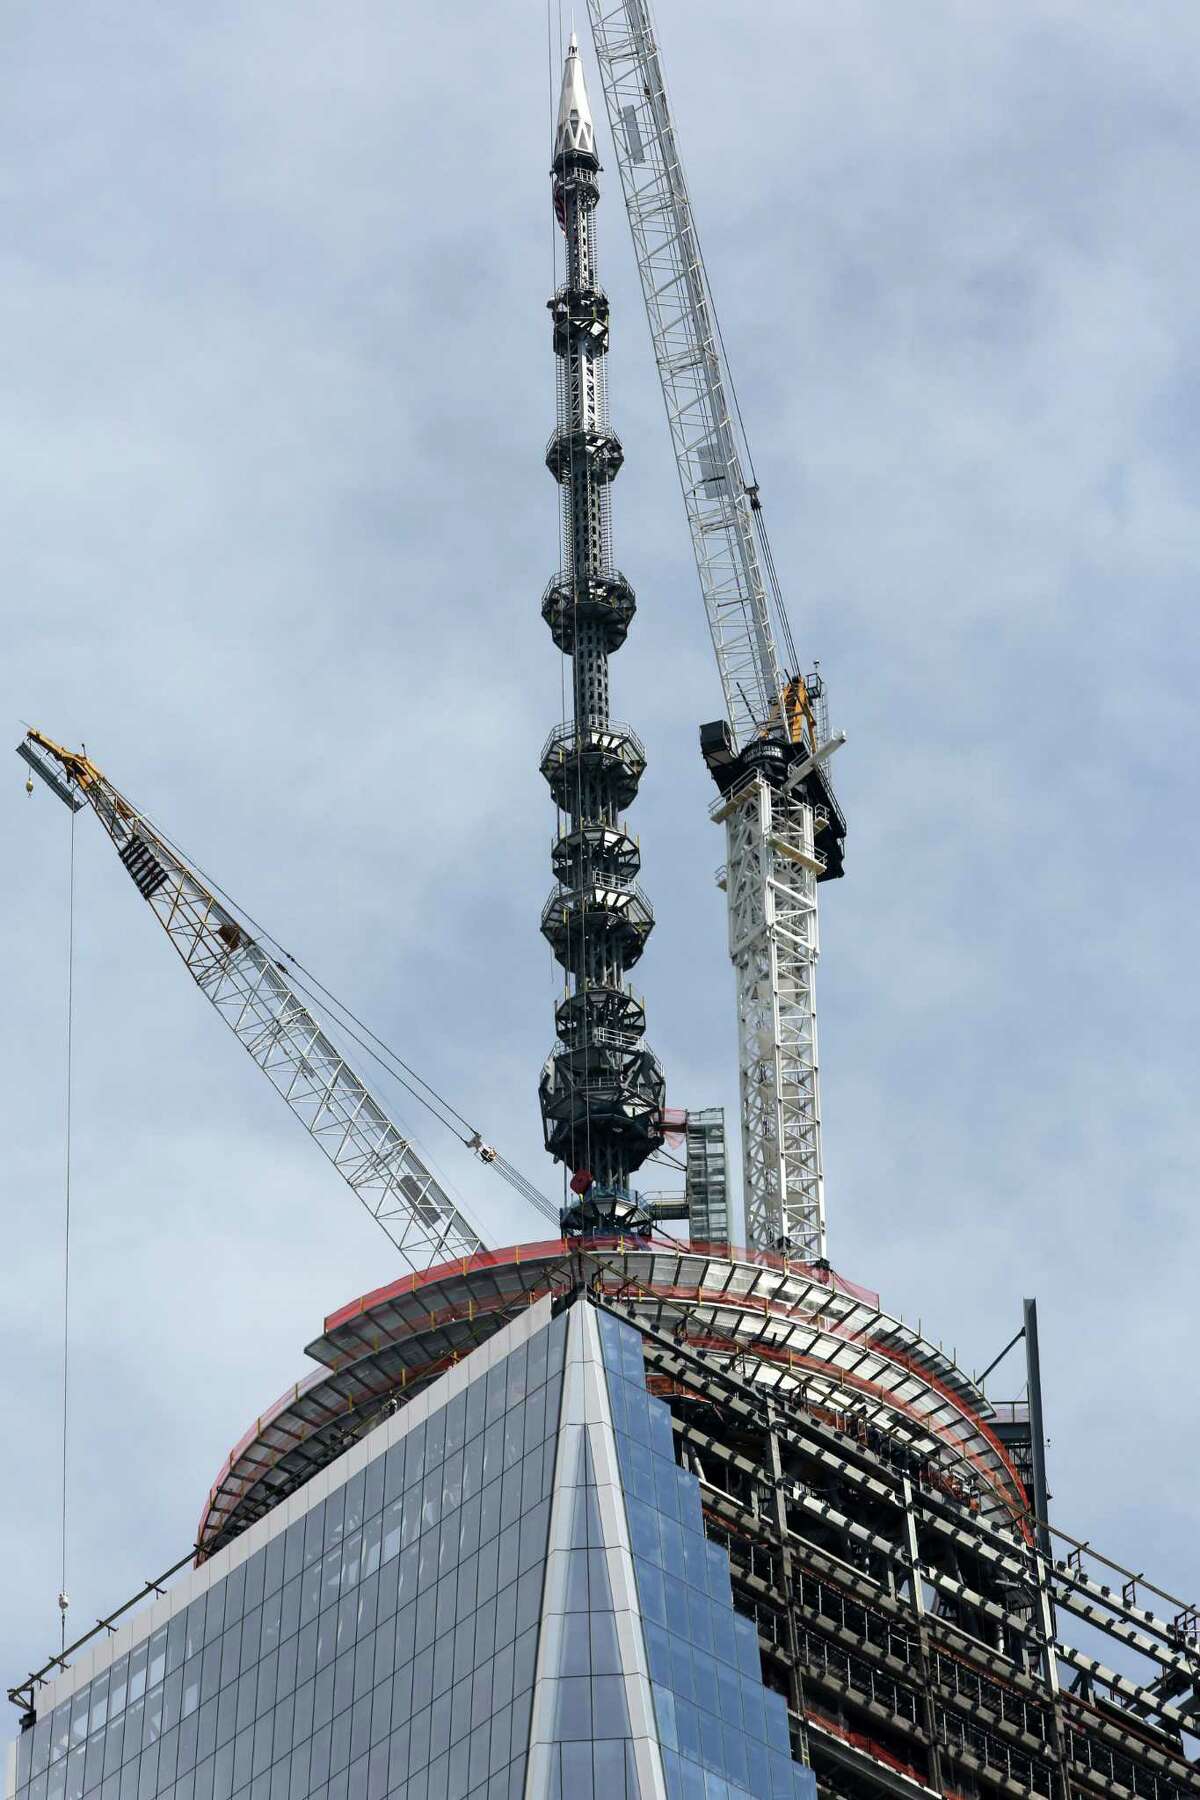 The 408-foot spire at the top of One World Trade Center is seen from lower Manhattan, Friday, May 10, 2013. The tall, heavy spire was fully installed Friday, bringing One World Trade Center to its symbolic height of 1,776 feet.